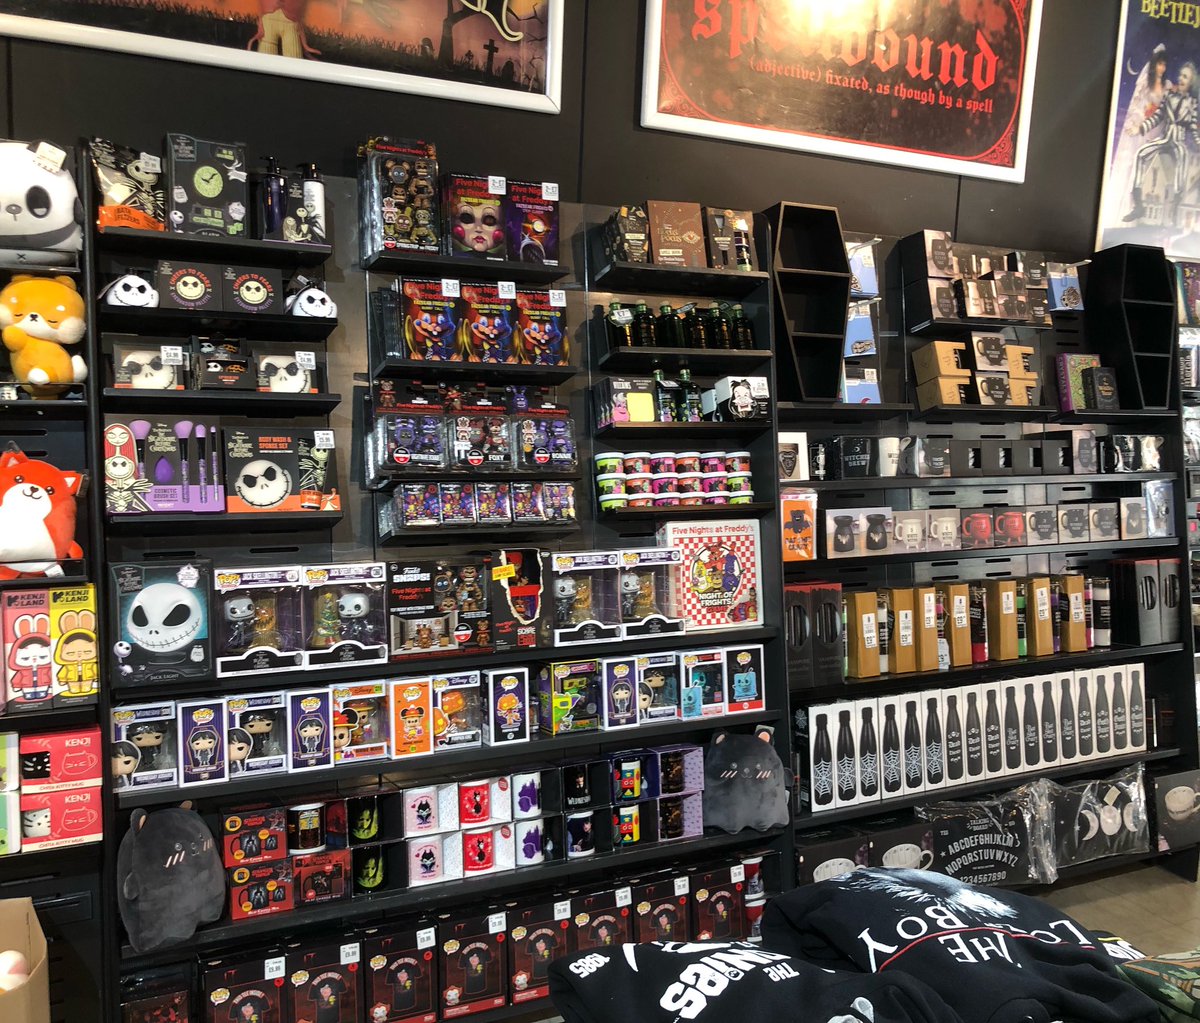 Make sure you check out our spooky and spellbound section for some new Halloween decor 🎃👻 #halloween #halloween🎃 #spookyseason #halloweendecor #spellbound #witchcraft #nightmarebeforechristmas #fivenightsatfreddys #funkpops #hmv #hmvbelfast